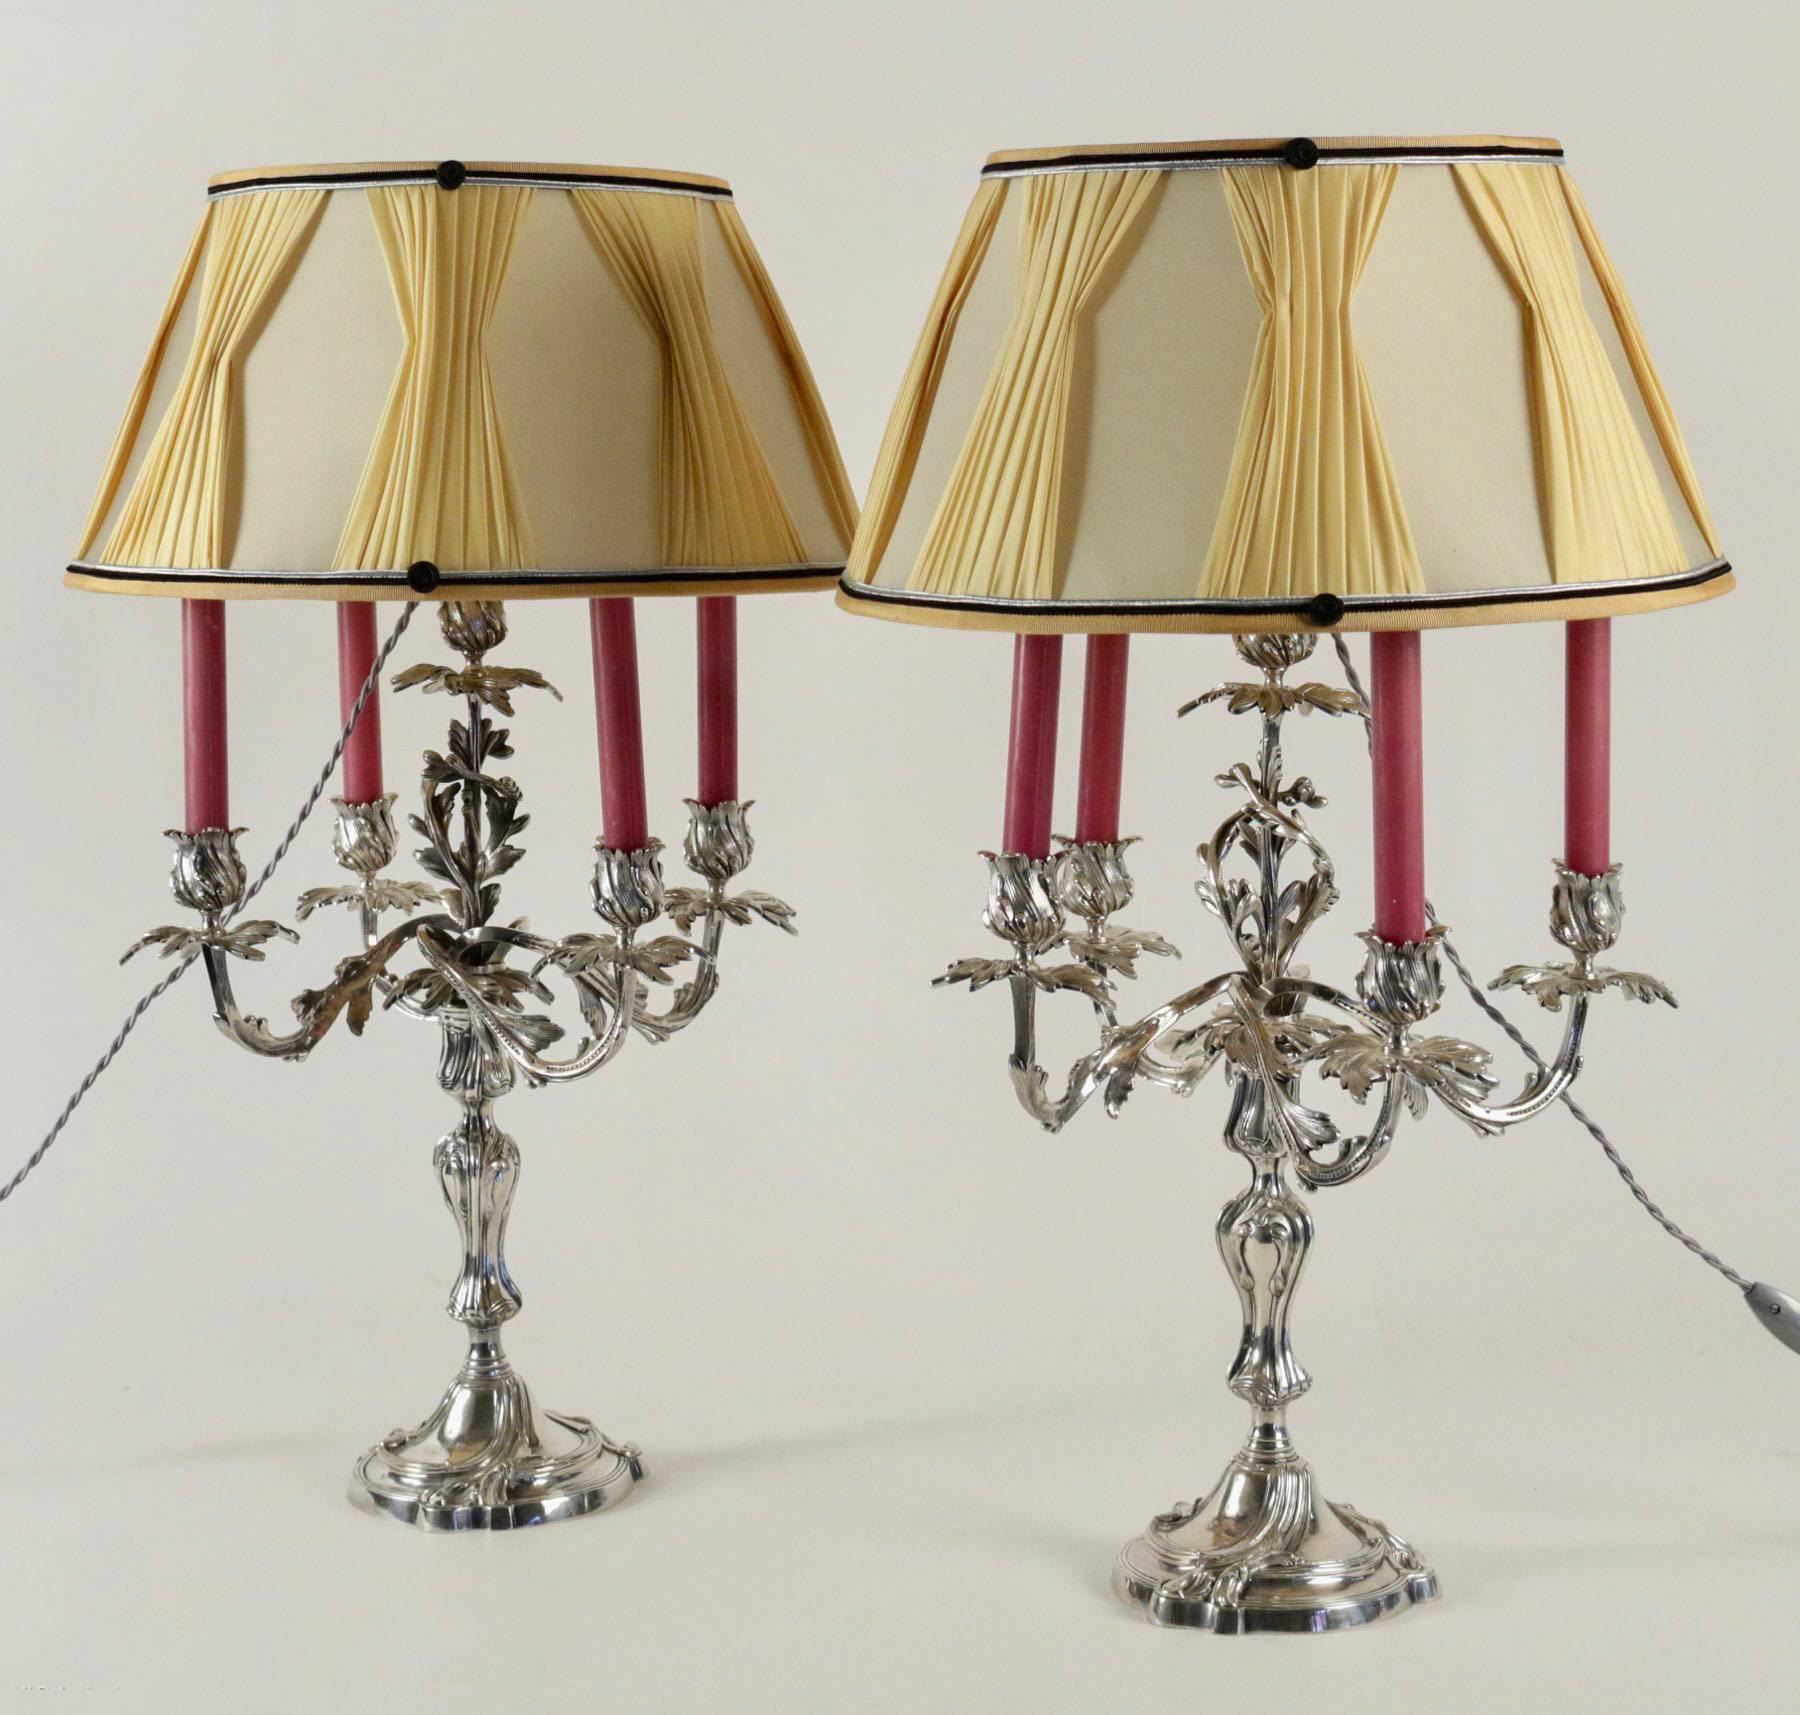 19th Century French Louis XV Style Pair of Silver Plate Candelabra Lamps, circa 1860-1880